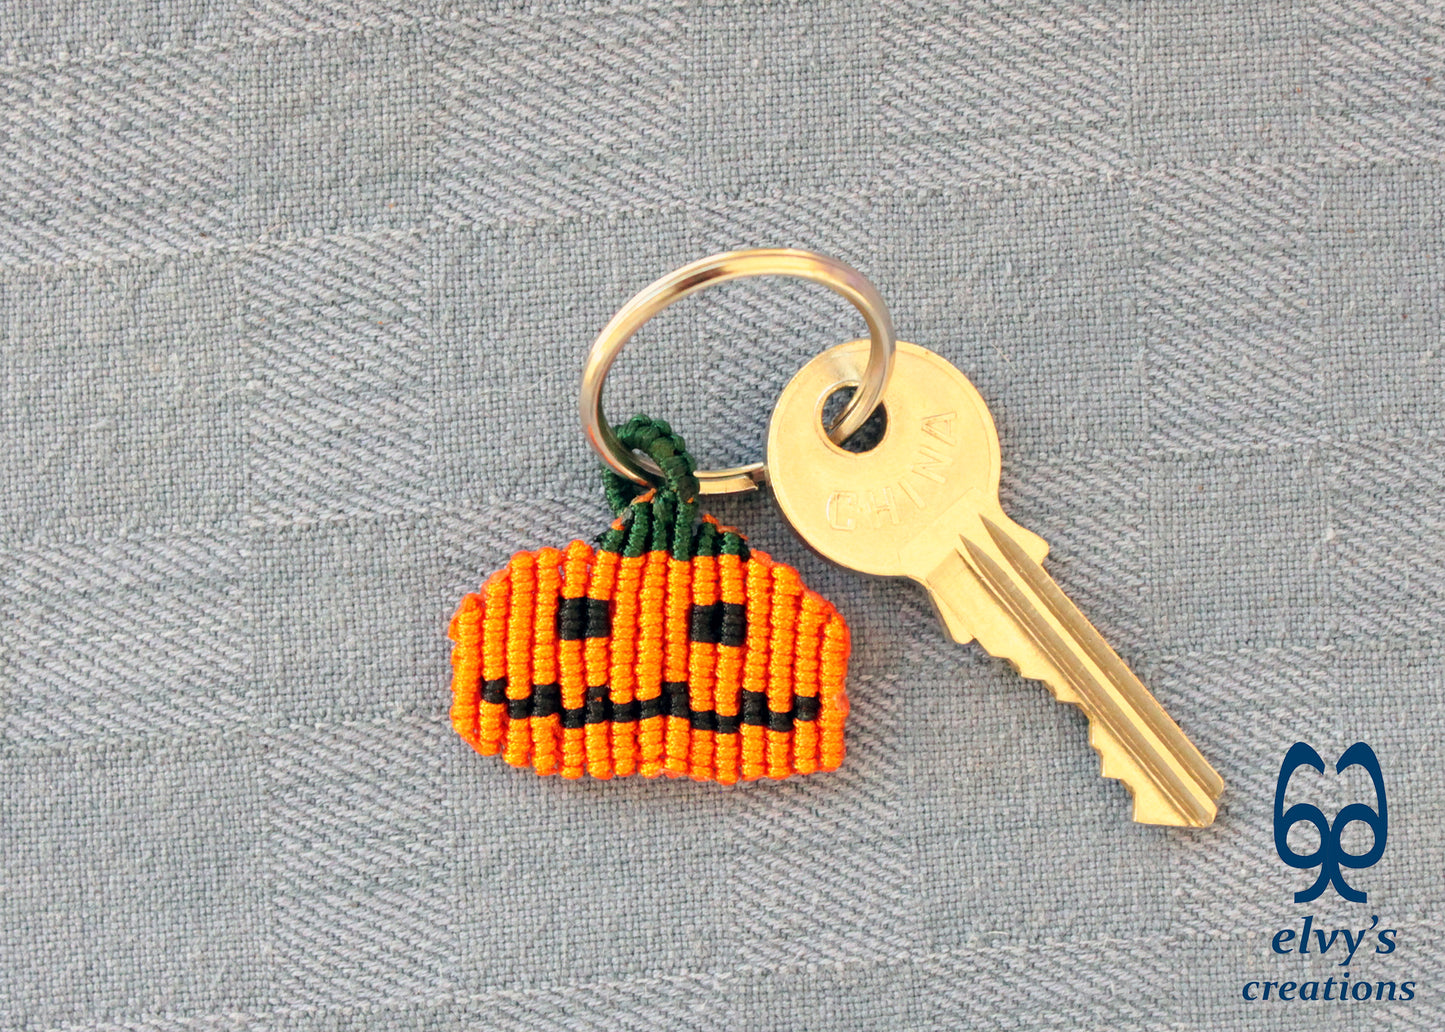 Handmade Macrame Key Chain, Housewarming Gift, Small Unique Gift for Woman and Man